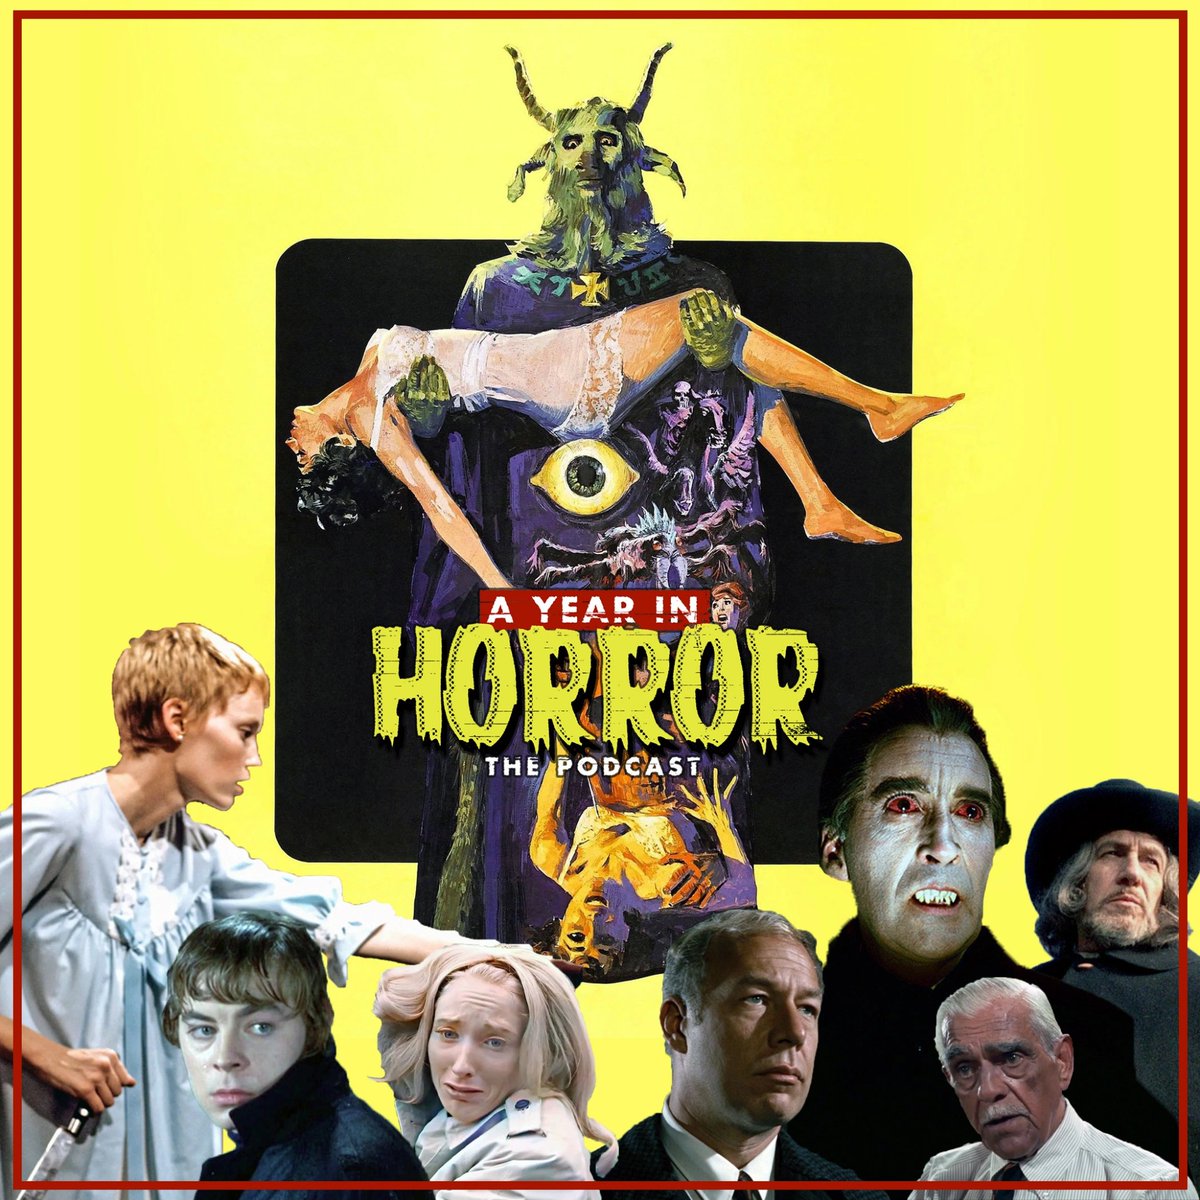 1968 A YEAR IN HORROR Don't mind if I do w/ guests @imm1987, @NightmaresNorth, @kellsmcnells, Clay Tatum, @WhitmerThomas and Lee Beamish. And tomorrow we have Los Bitchos covering Rosemary's Baby. It's live now. Like, actually alive!